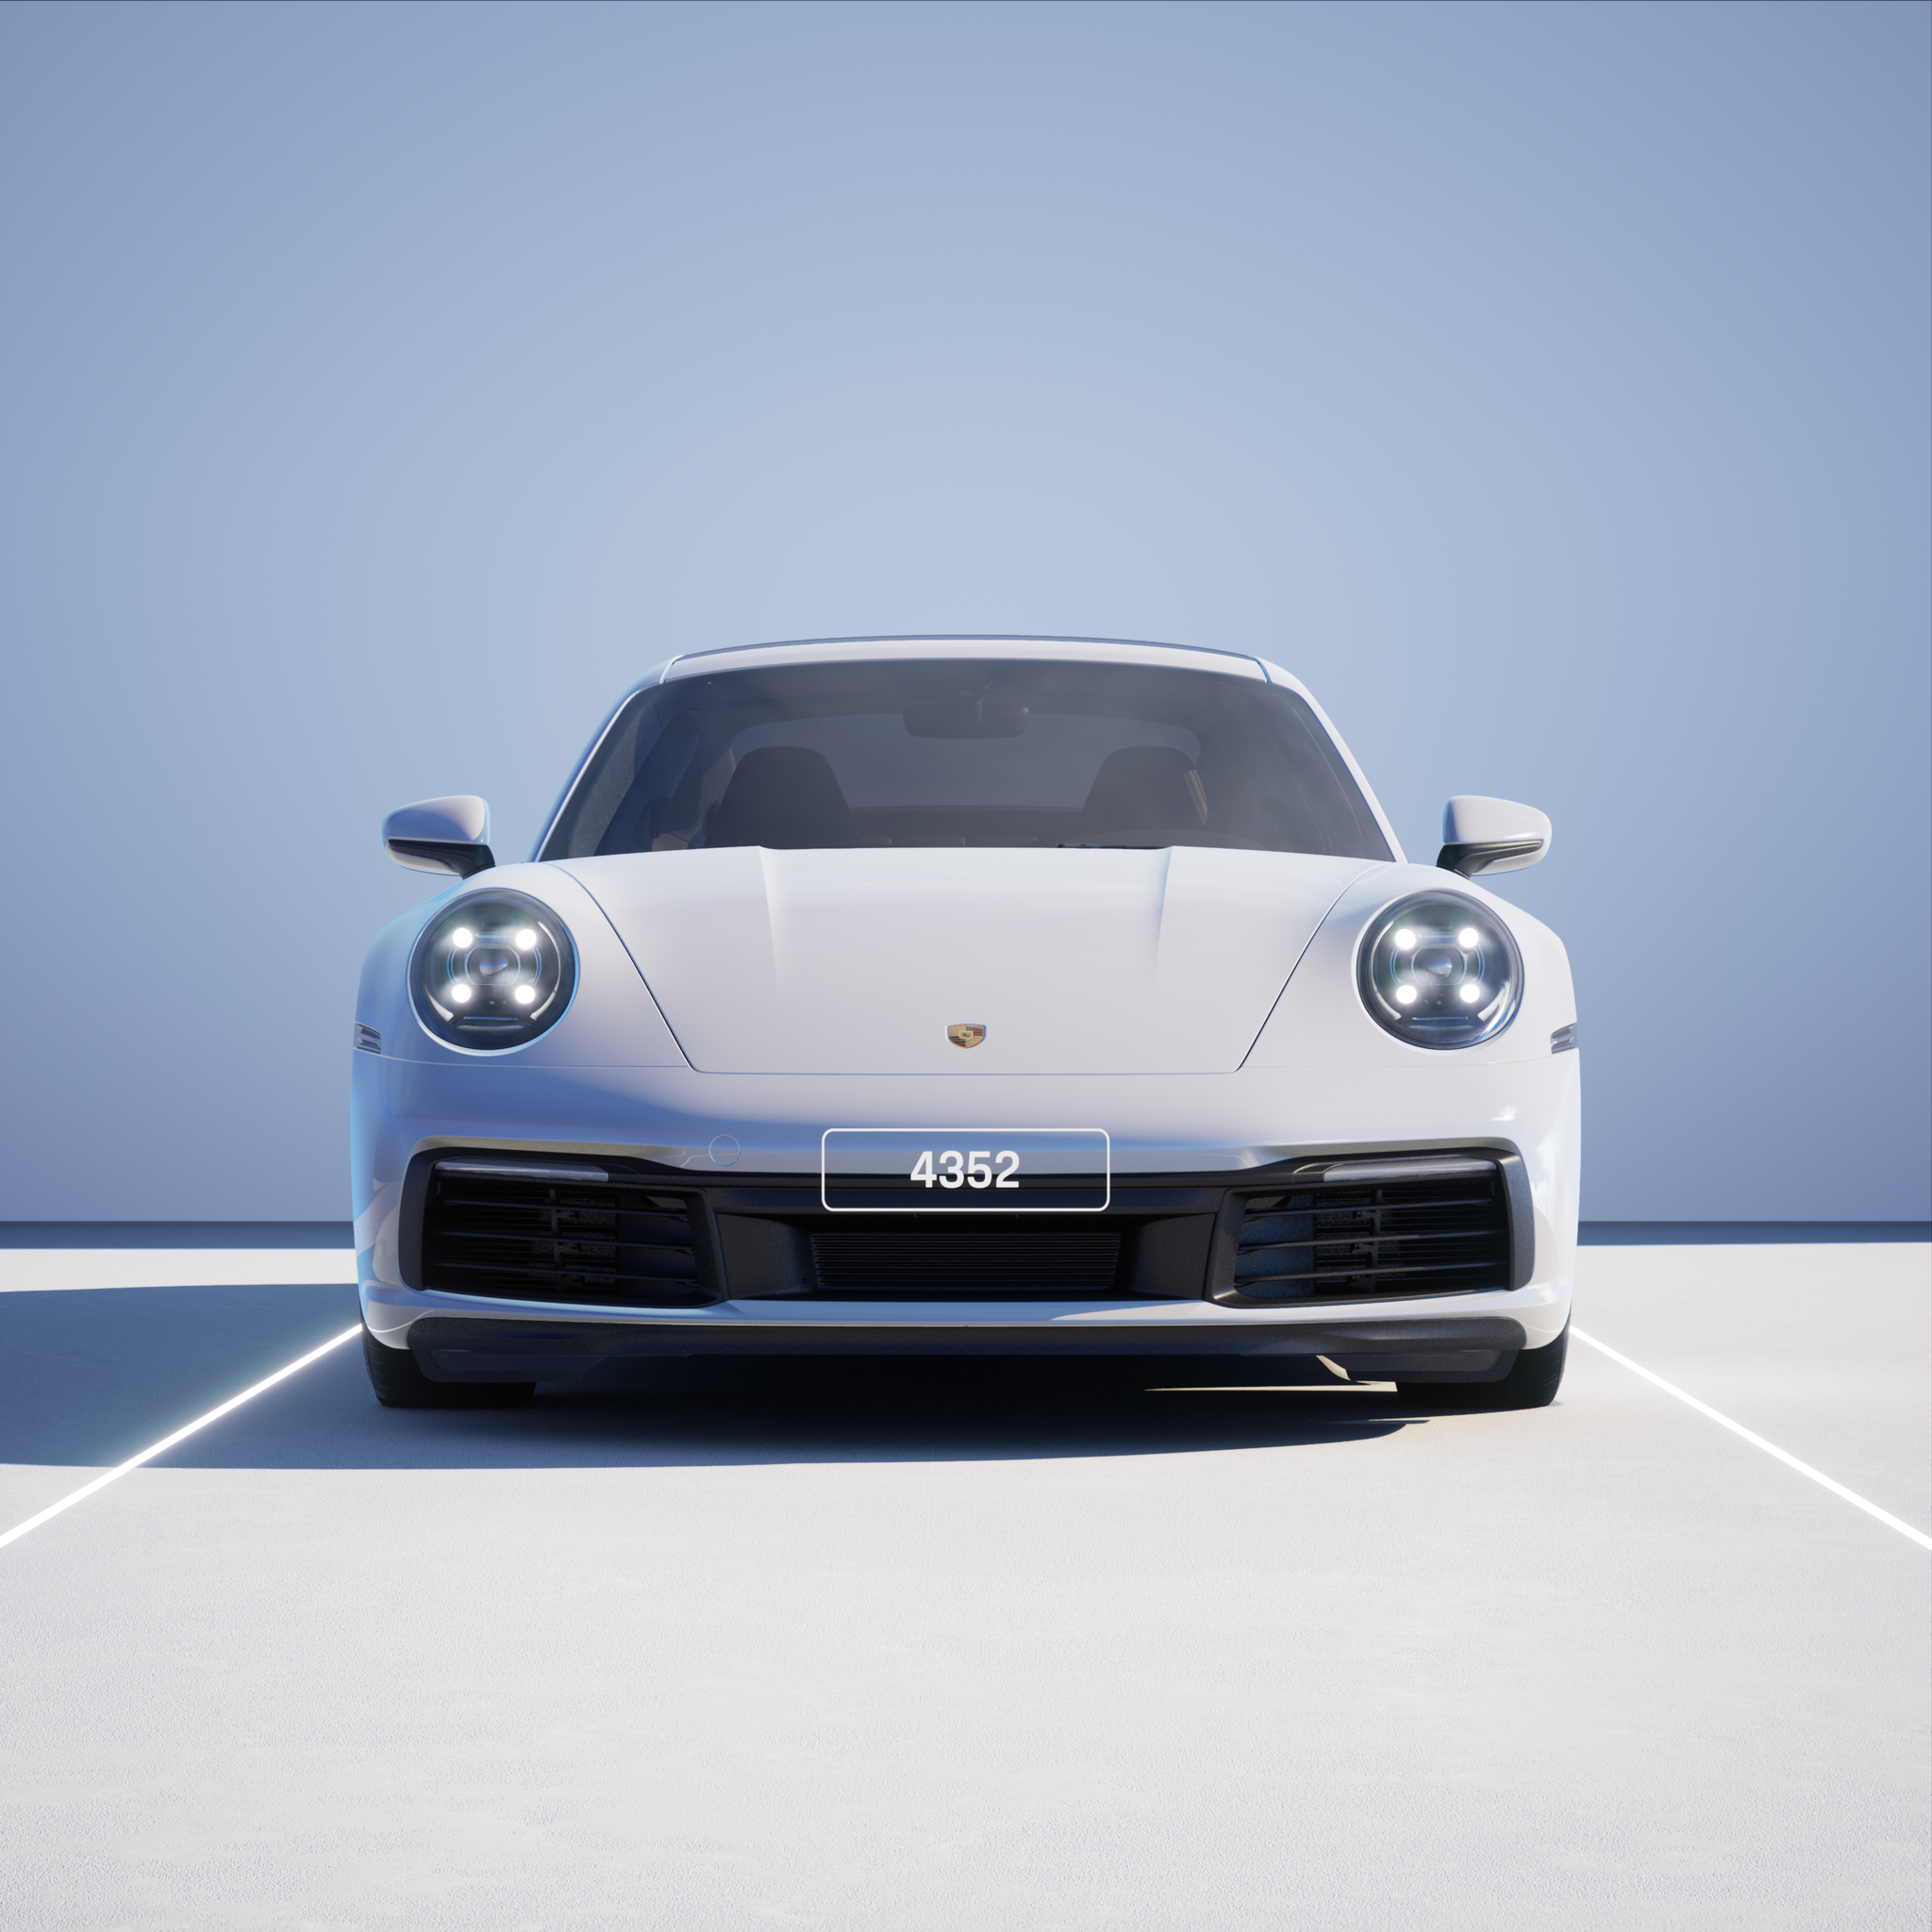 The PORSCHΞ 911 4352 image in phase